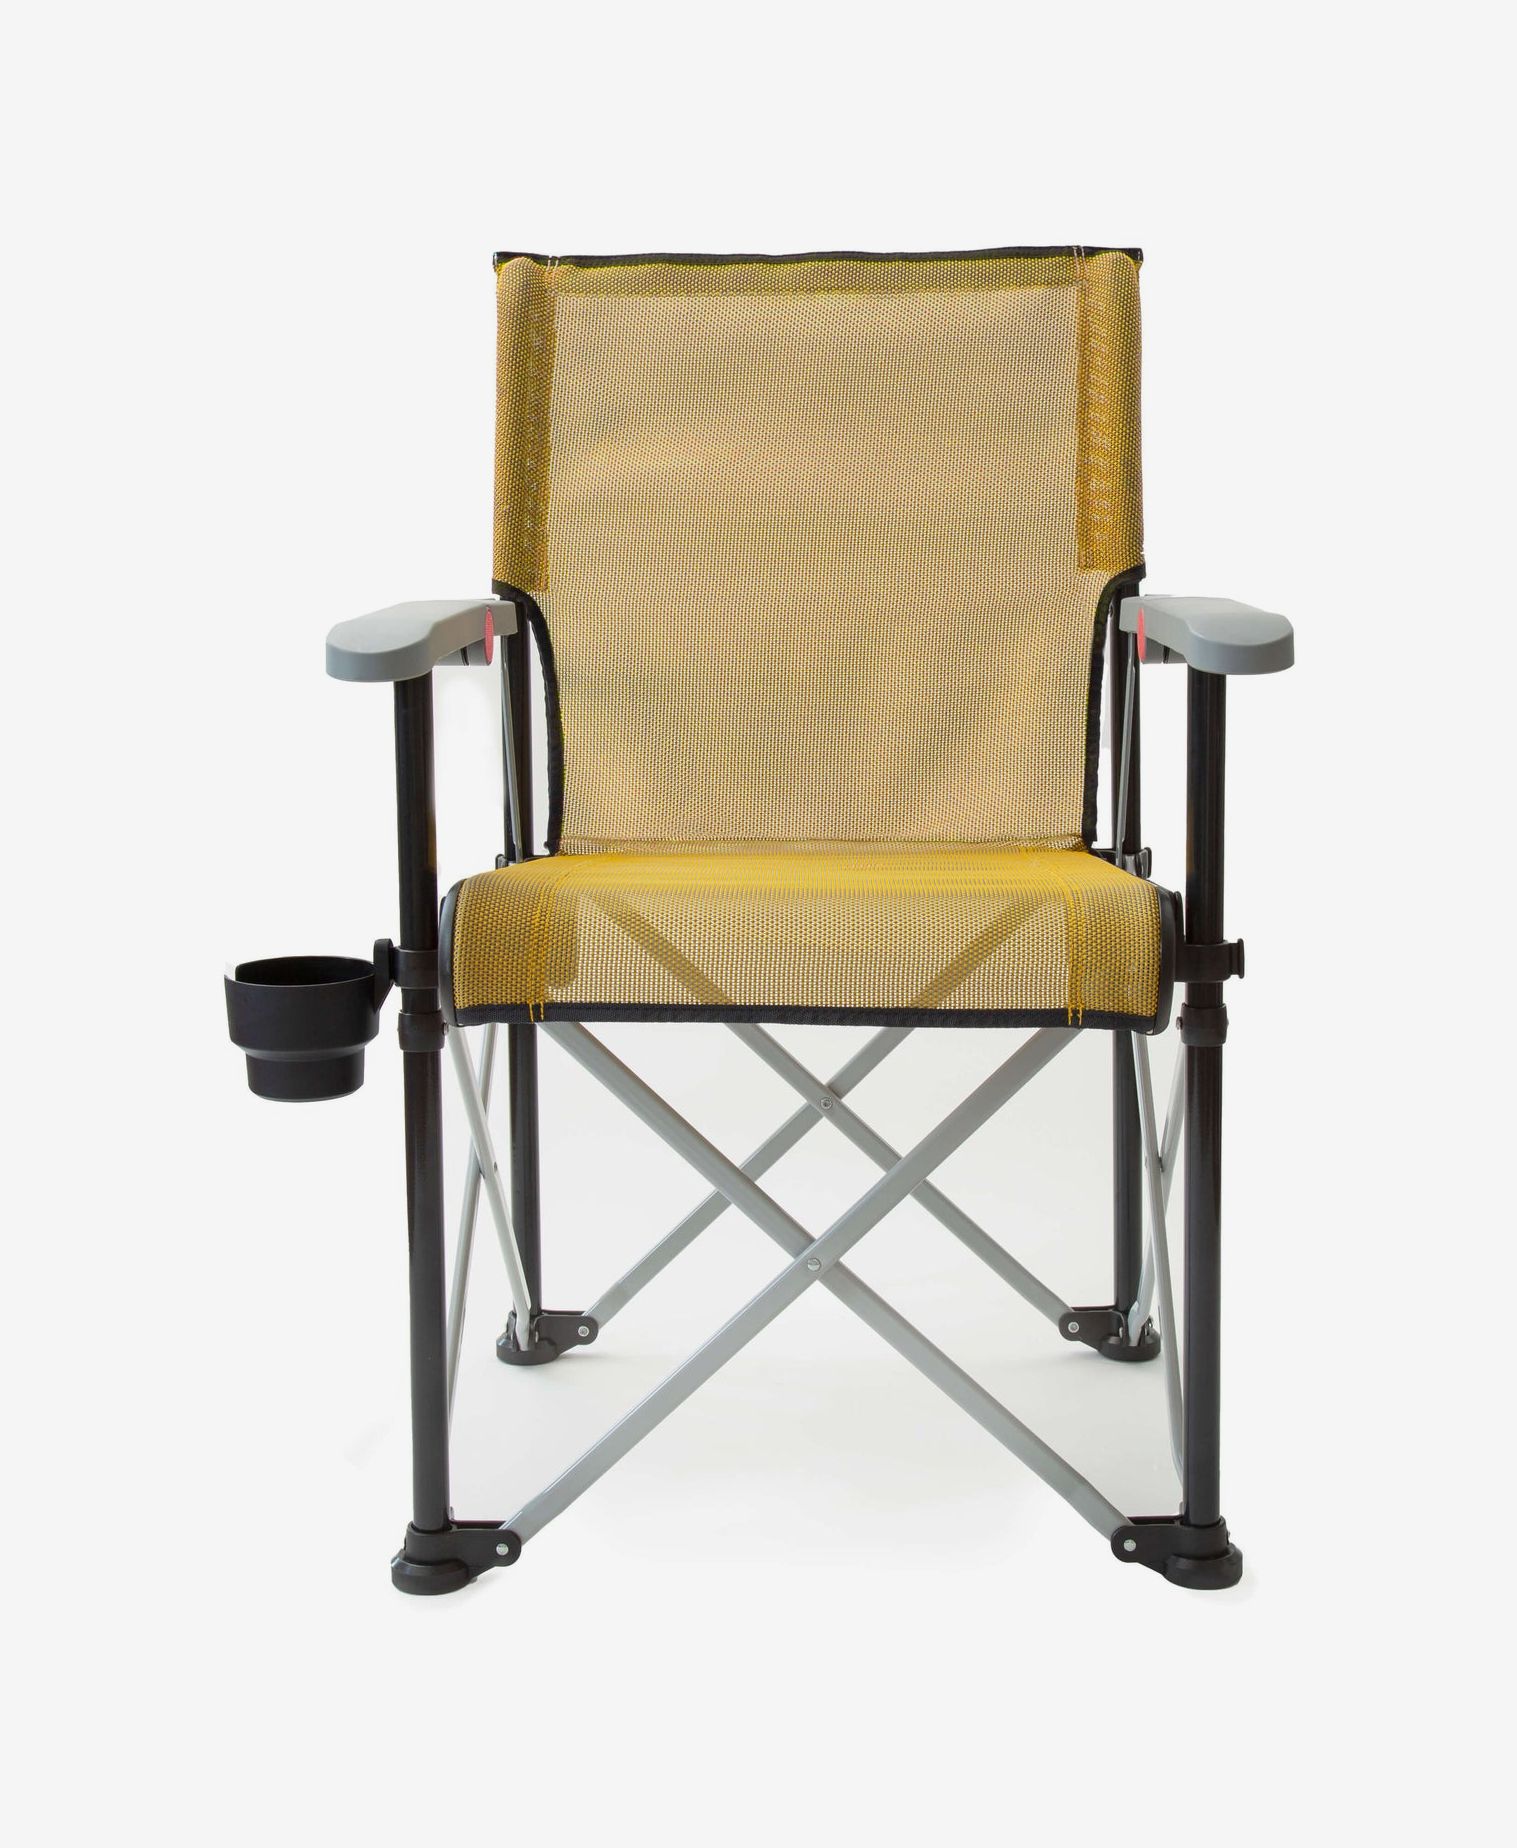 Sturdy Folding Chair with Carry Handle Robens Outback SETTLER CHAIR Comfortable 